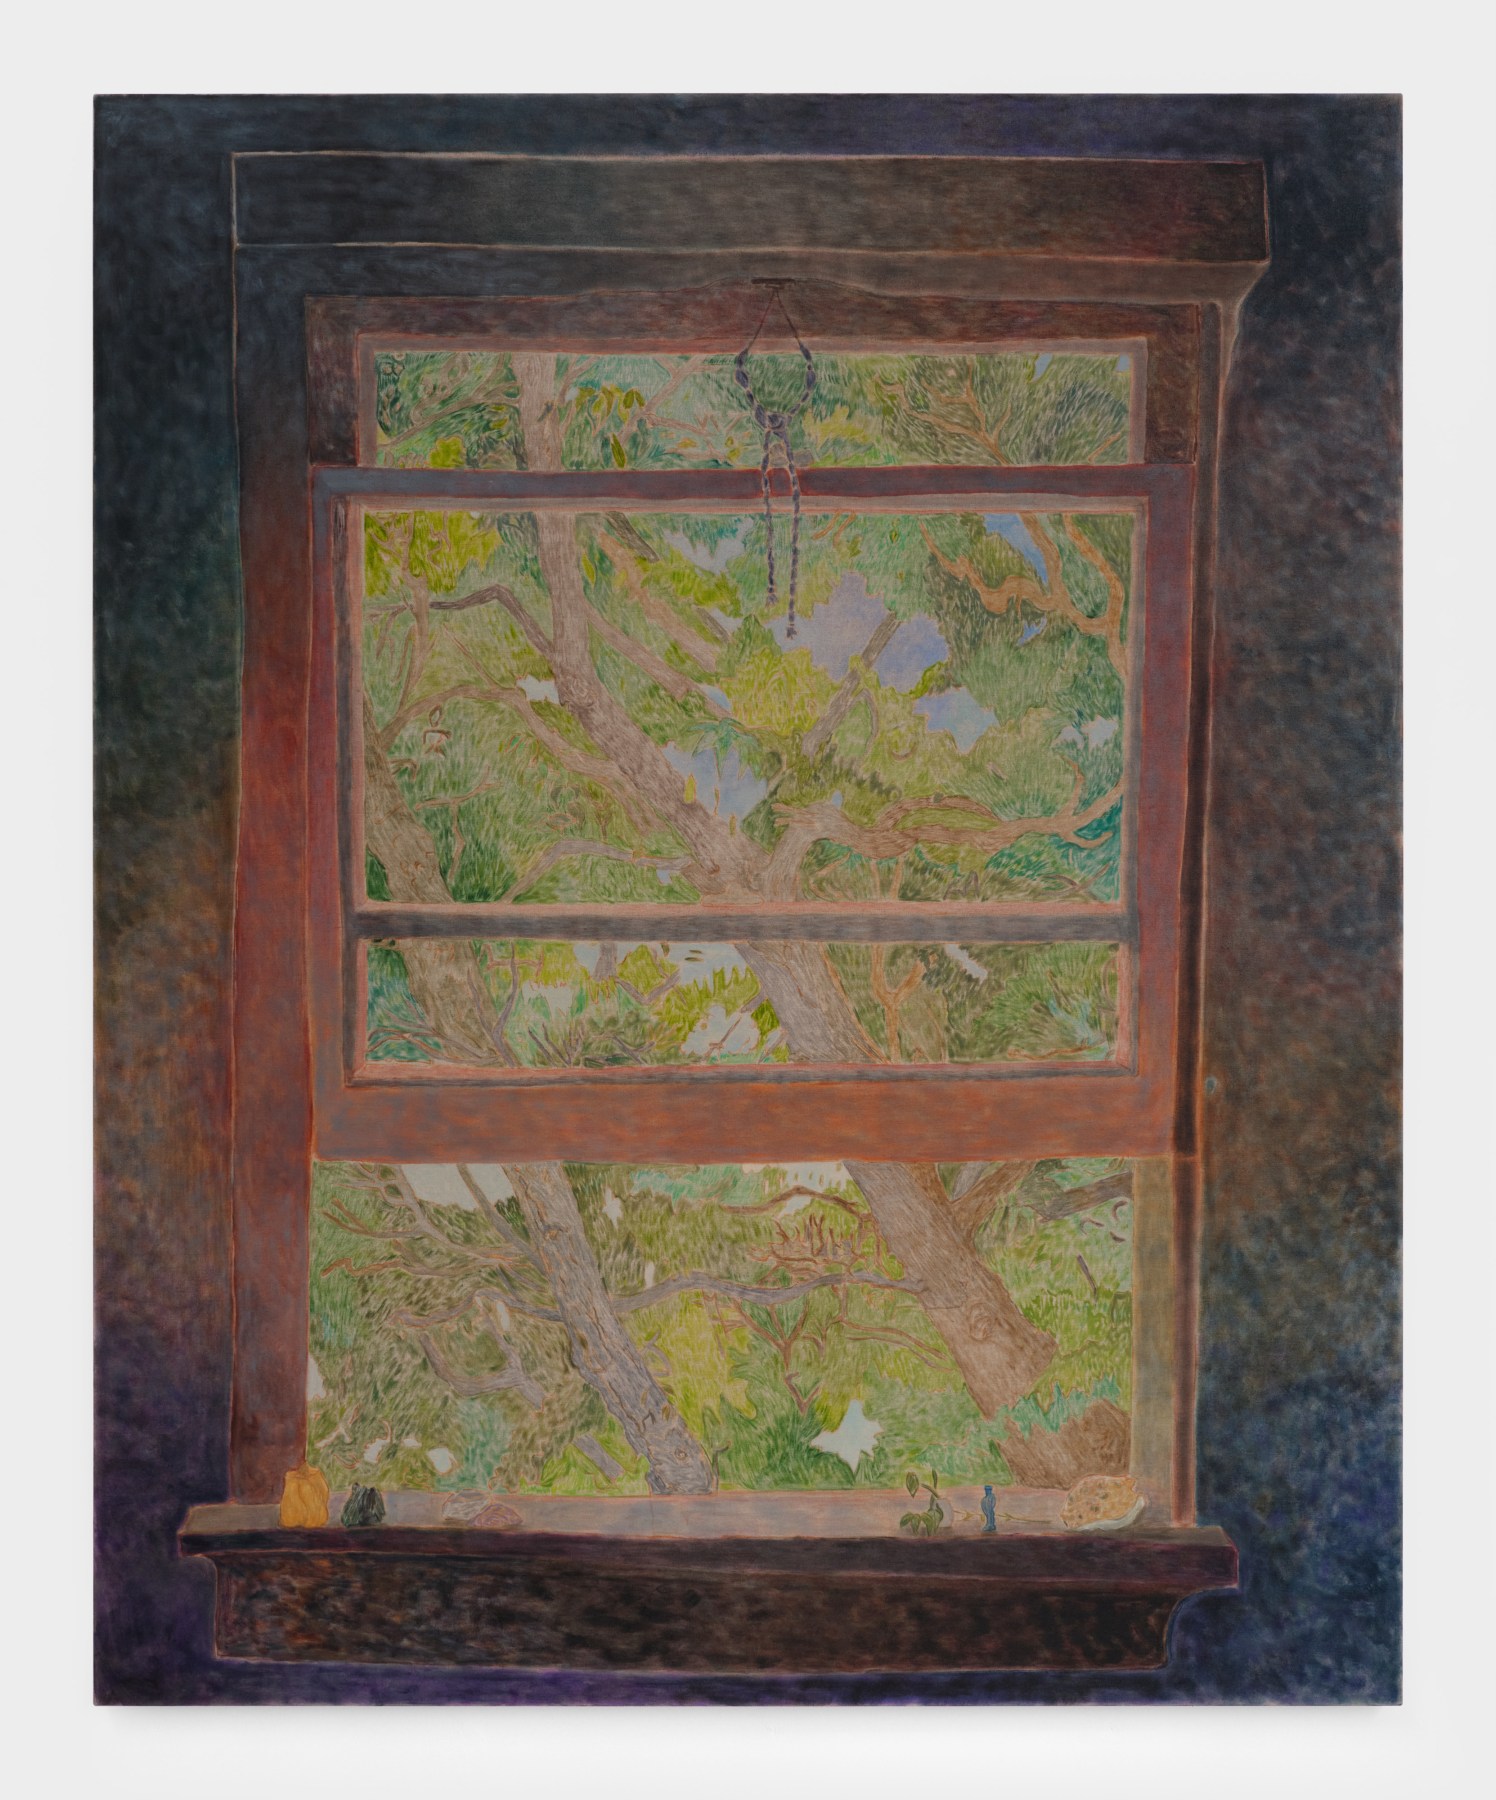 Hayley Barker, View from Isa's Window, 2022